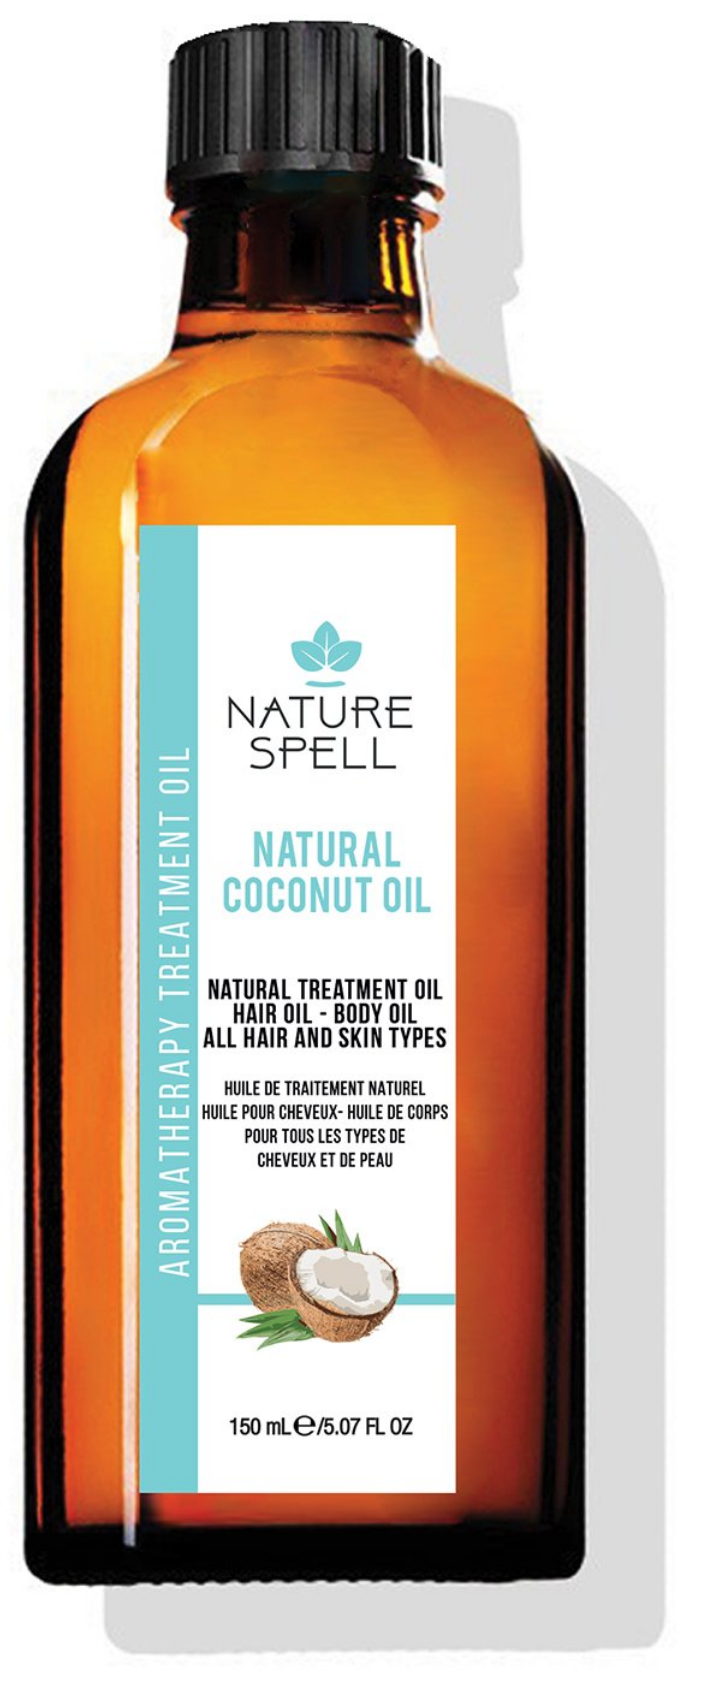 Nature Spell - Natural Coconut Oil,150 ML